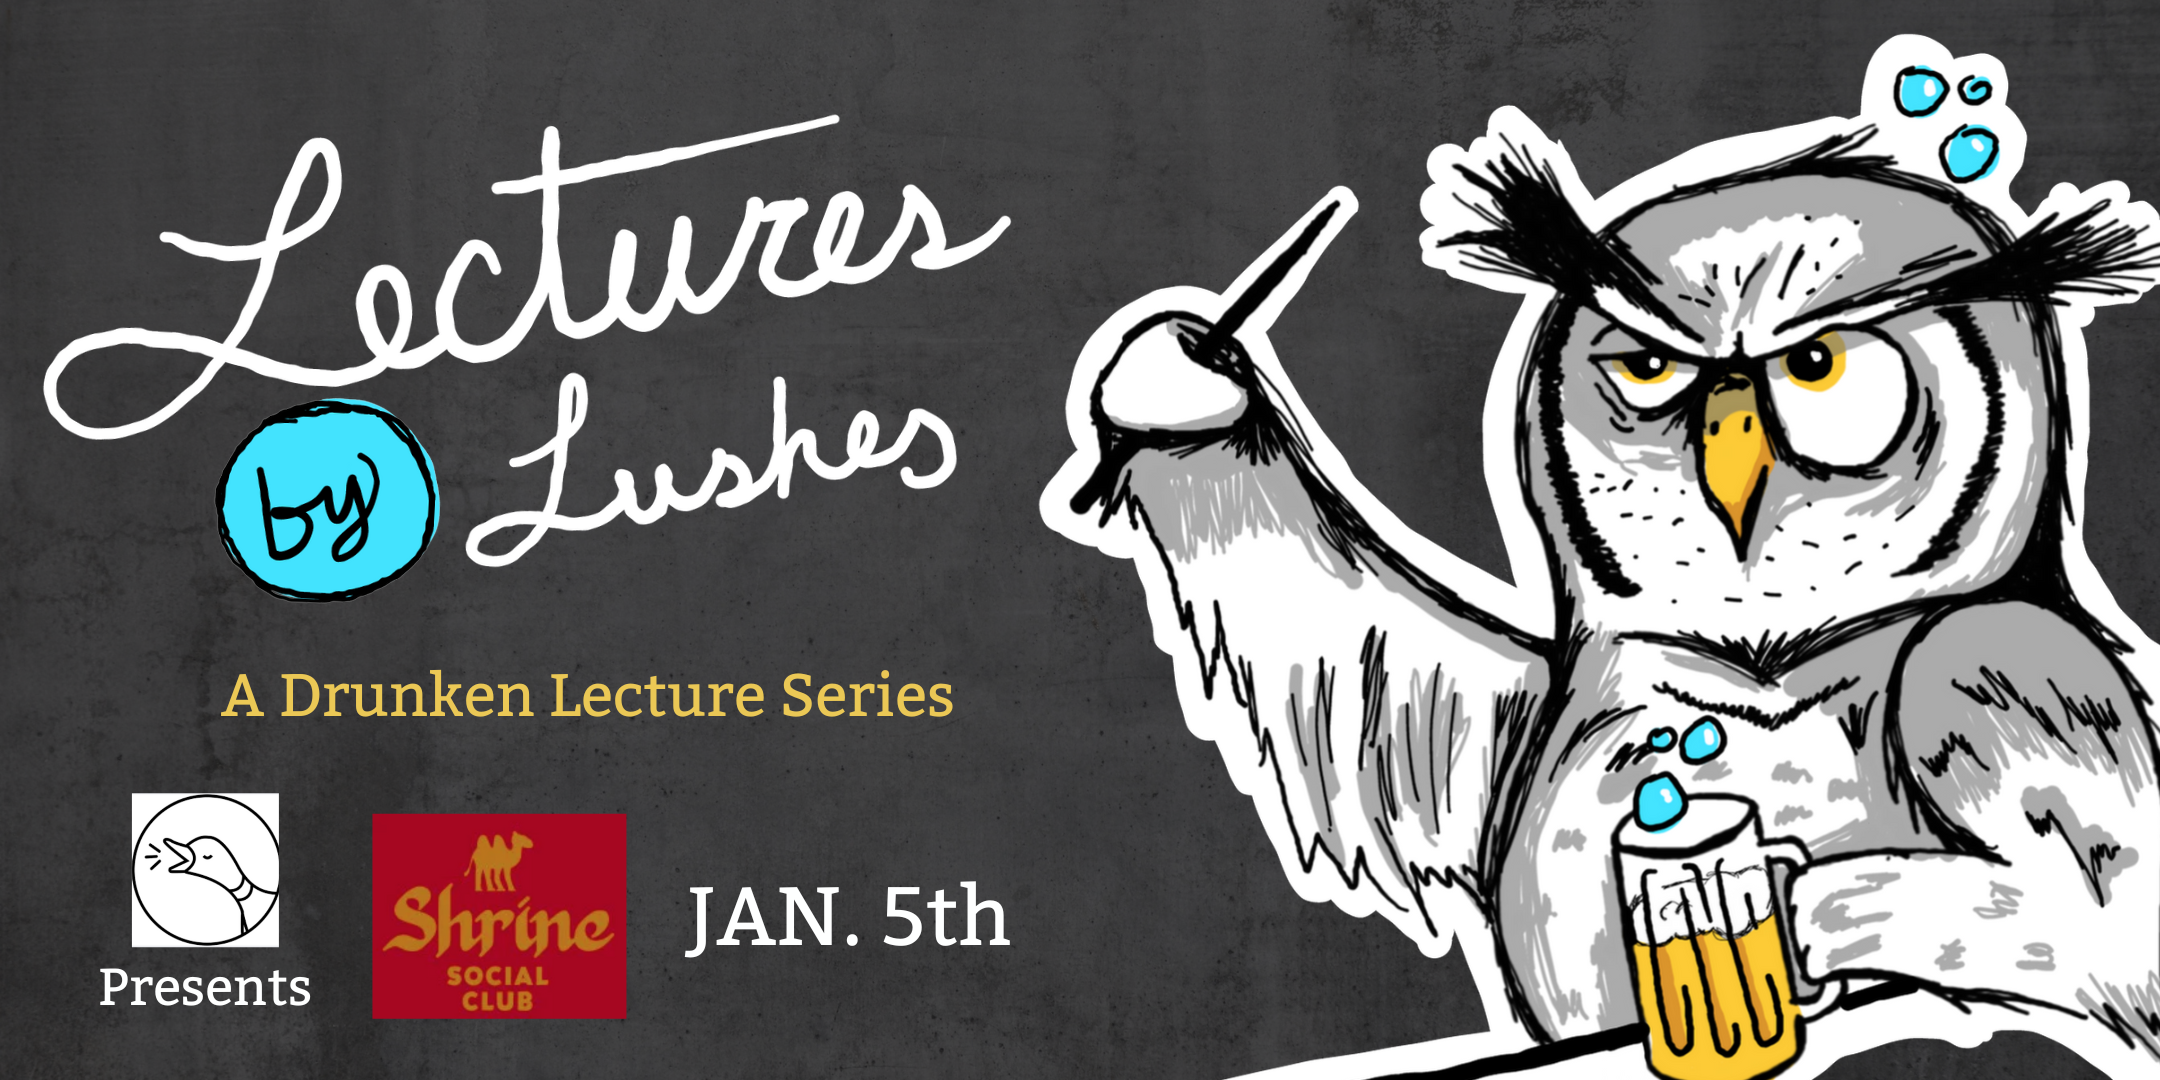 Lectures by Lushes shrine boise